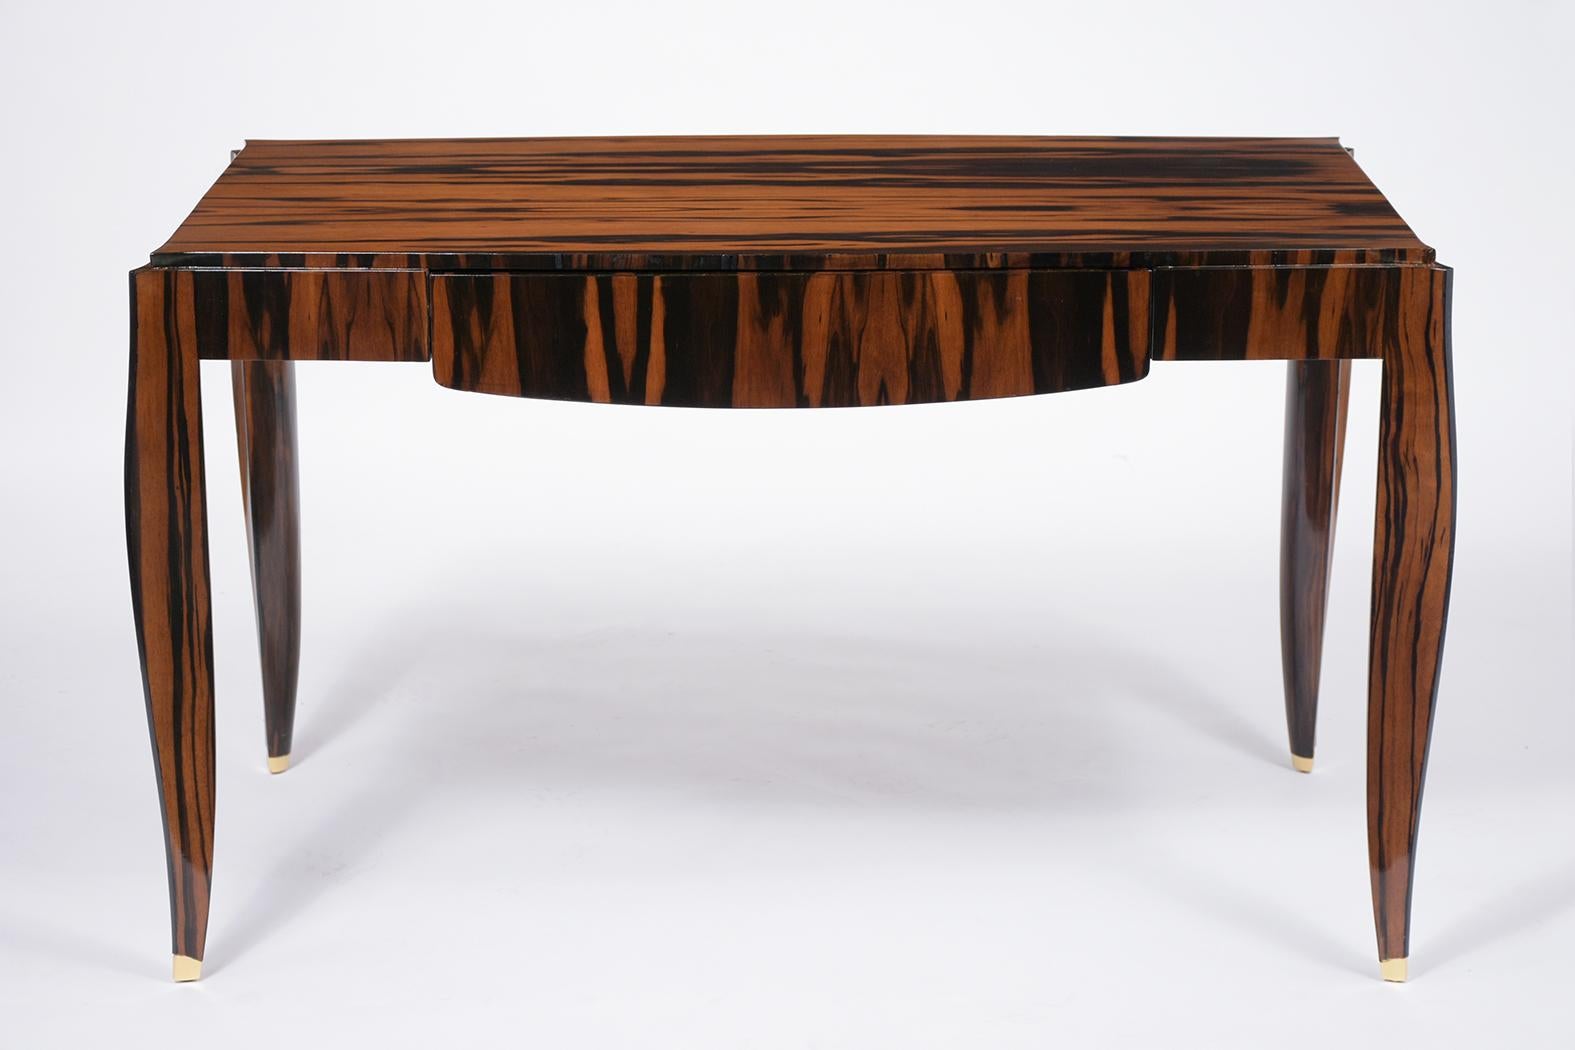 An elegant vintage Art Deco desk handcrafted out of mahogany in the style of Émile-Jacques Ruhlmann covered in a Macassar veneer and is fully restored. This writing table features a rich mahogany color stain with a newly lacquered finish and comes